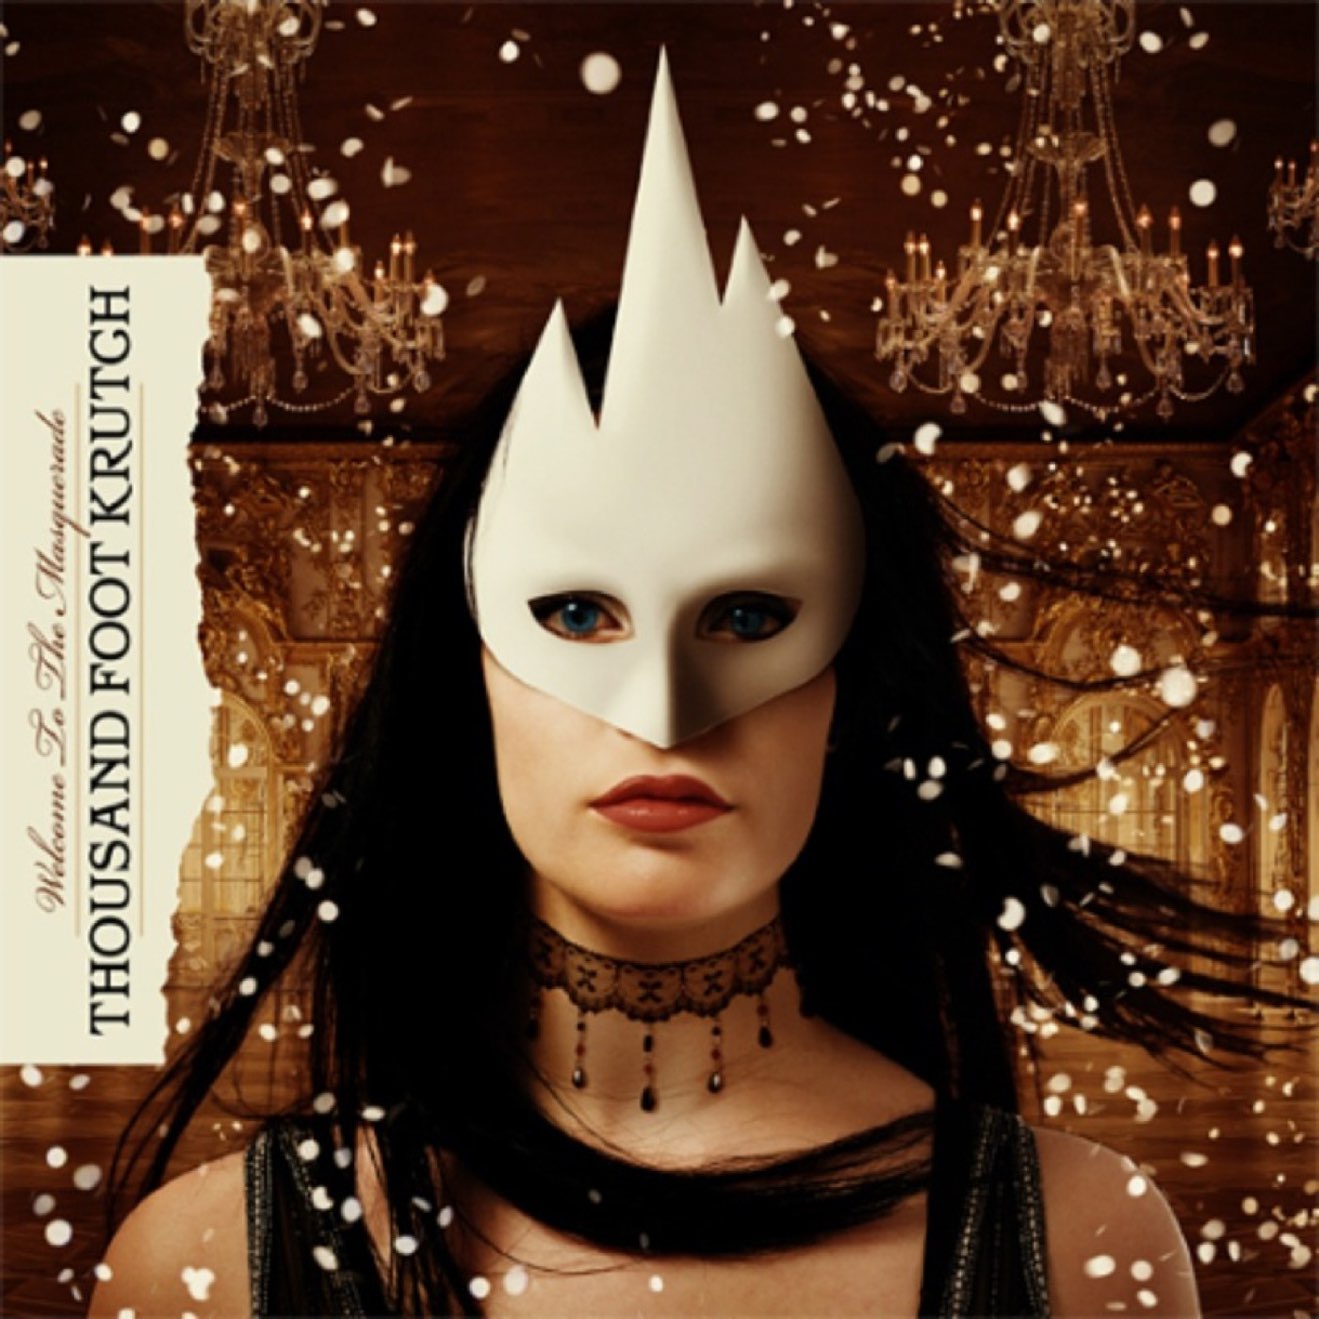 Thousand Foot Krutch – Welcome to the Masquerade (2009) [iTunes Match M4A]